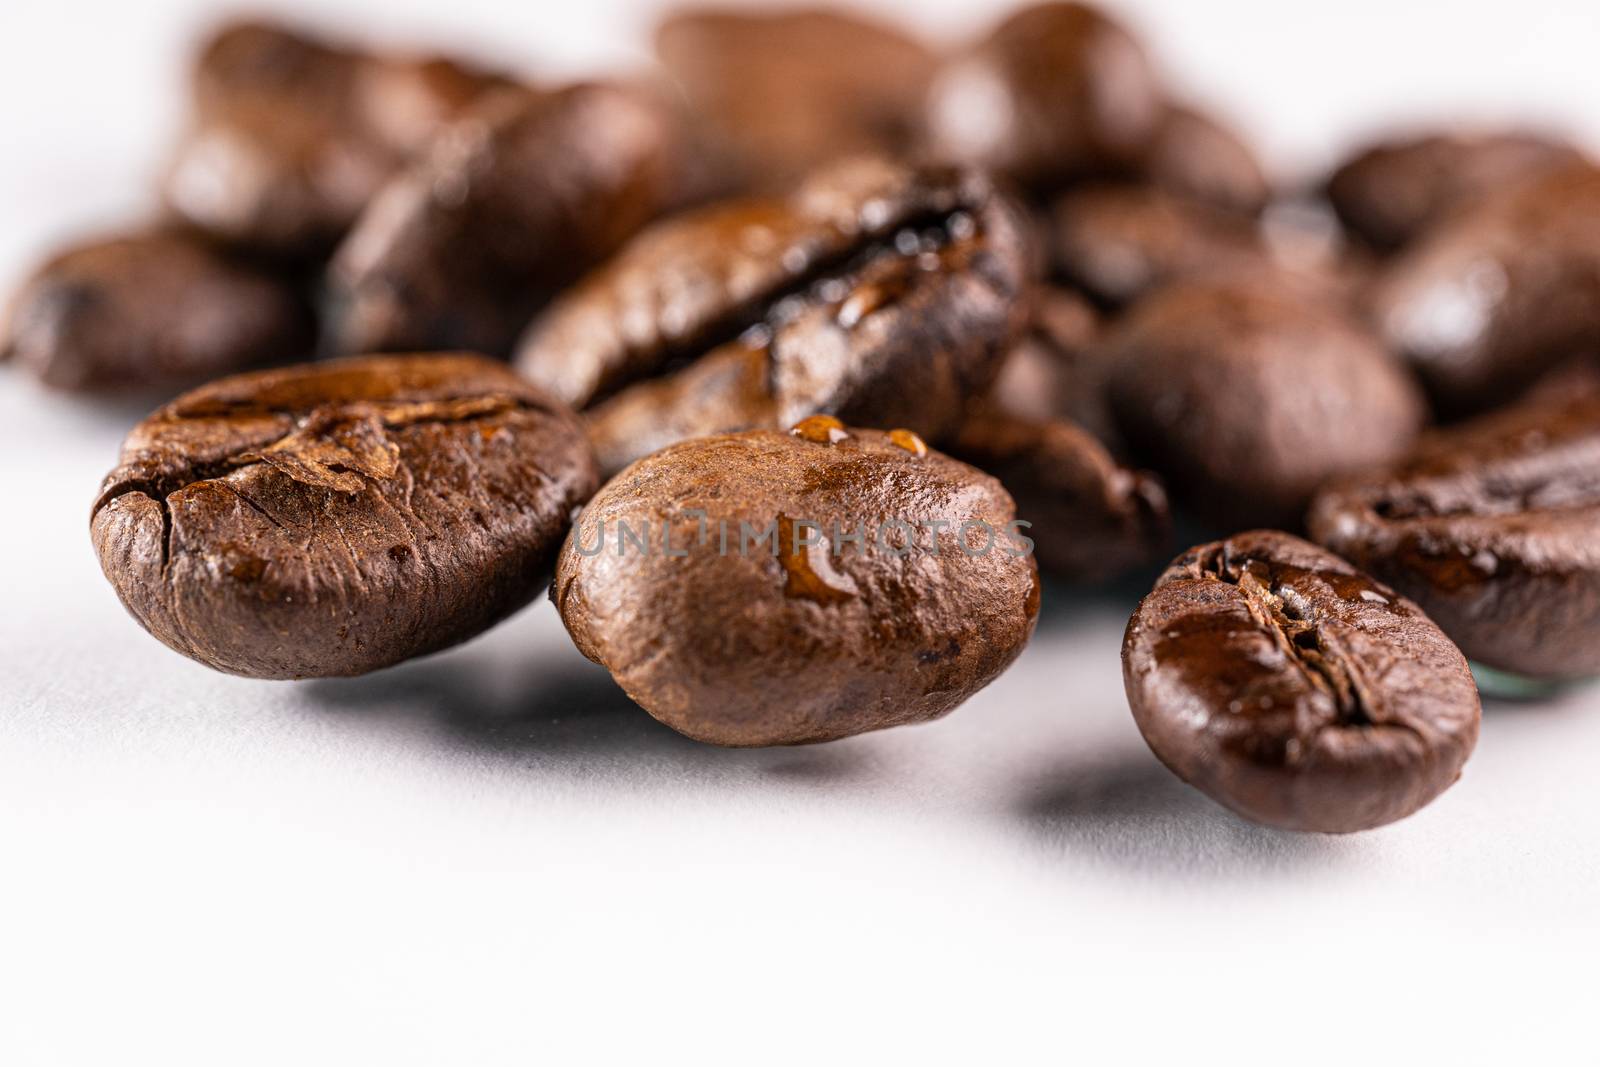 Brown roasted coffee beans on white background. by tanaonte